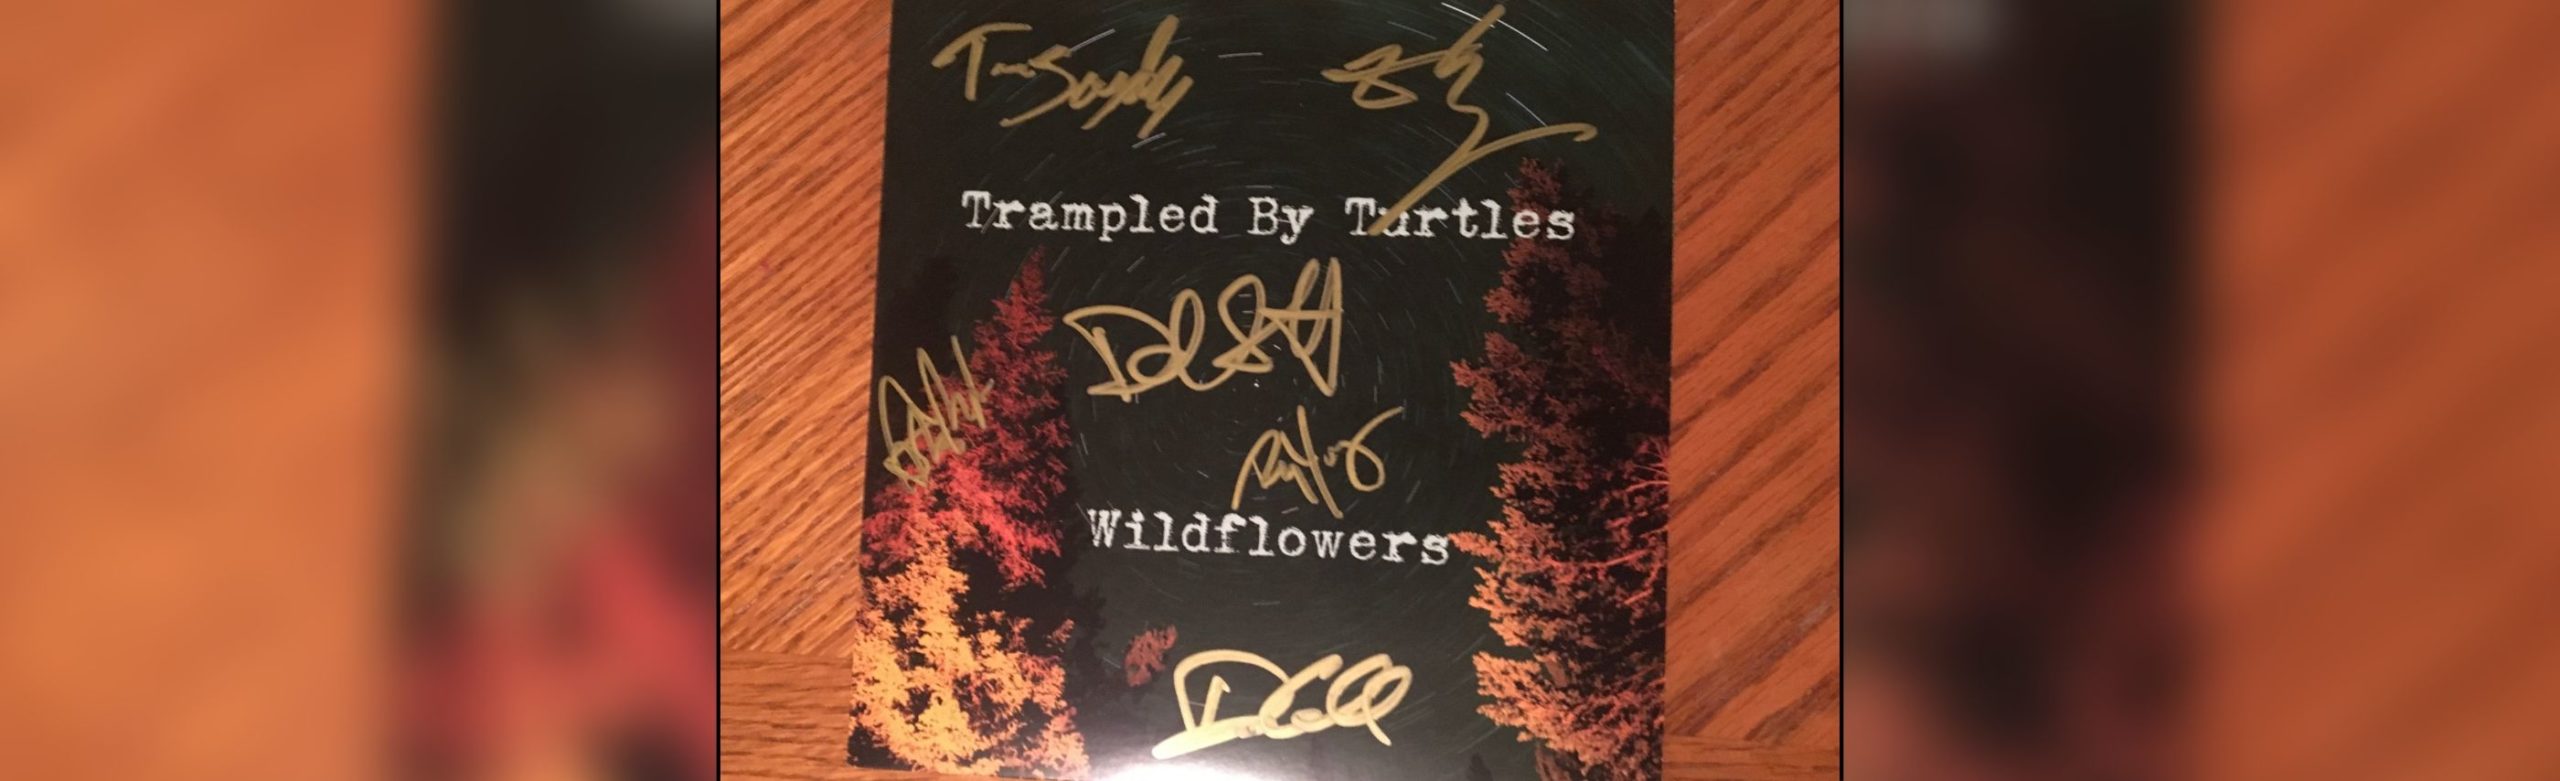 Trampled By Turtles Autographed 7″ Vinyl + Ticket Giveaway Image